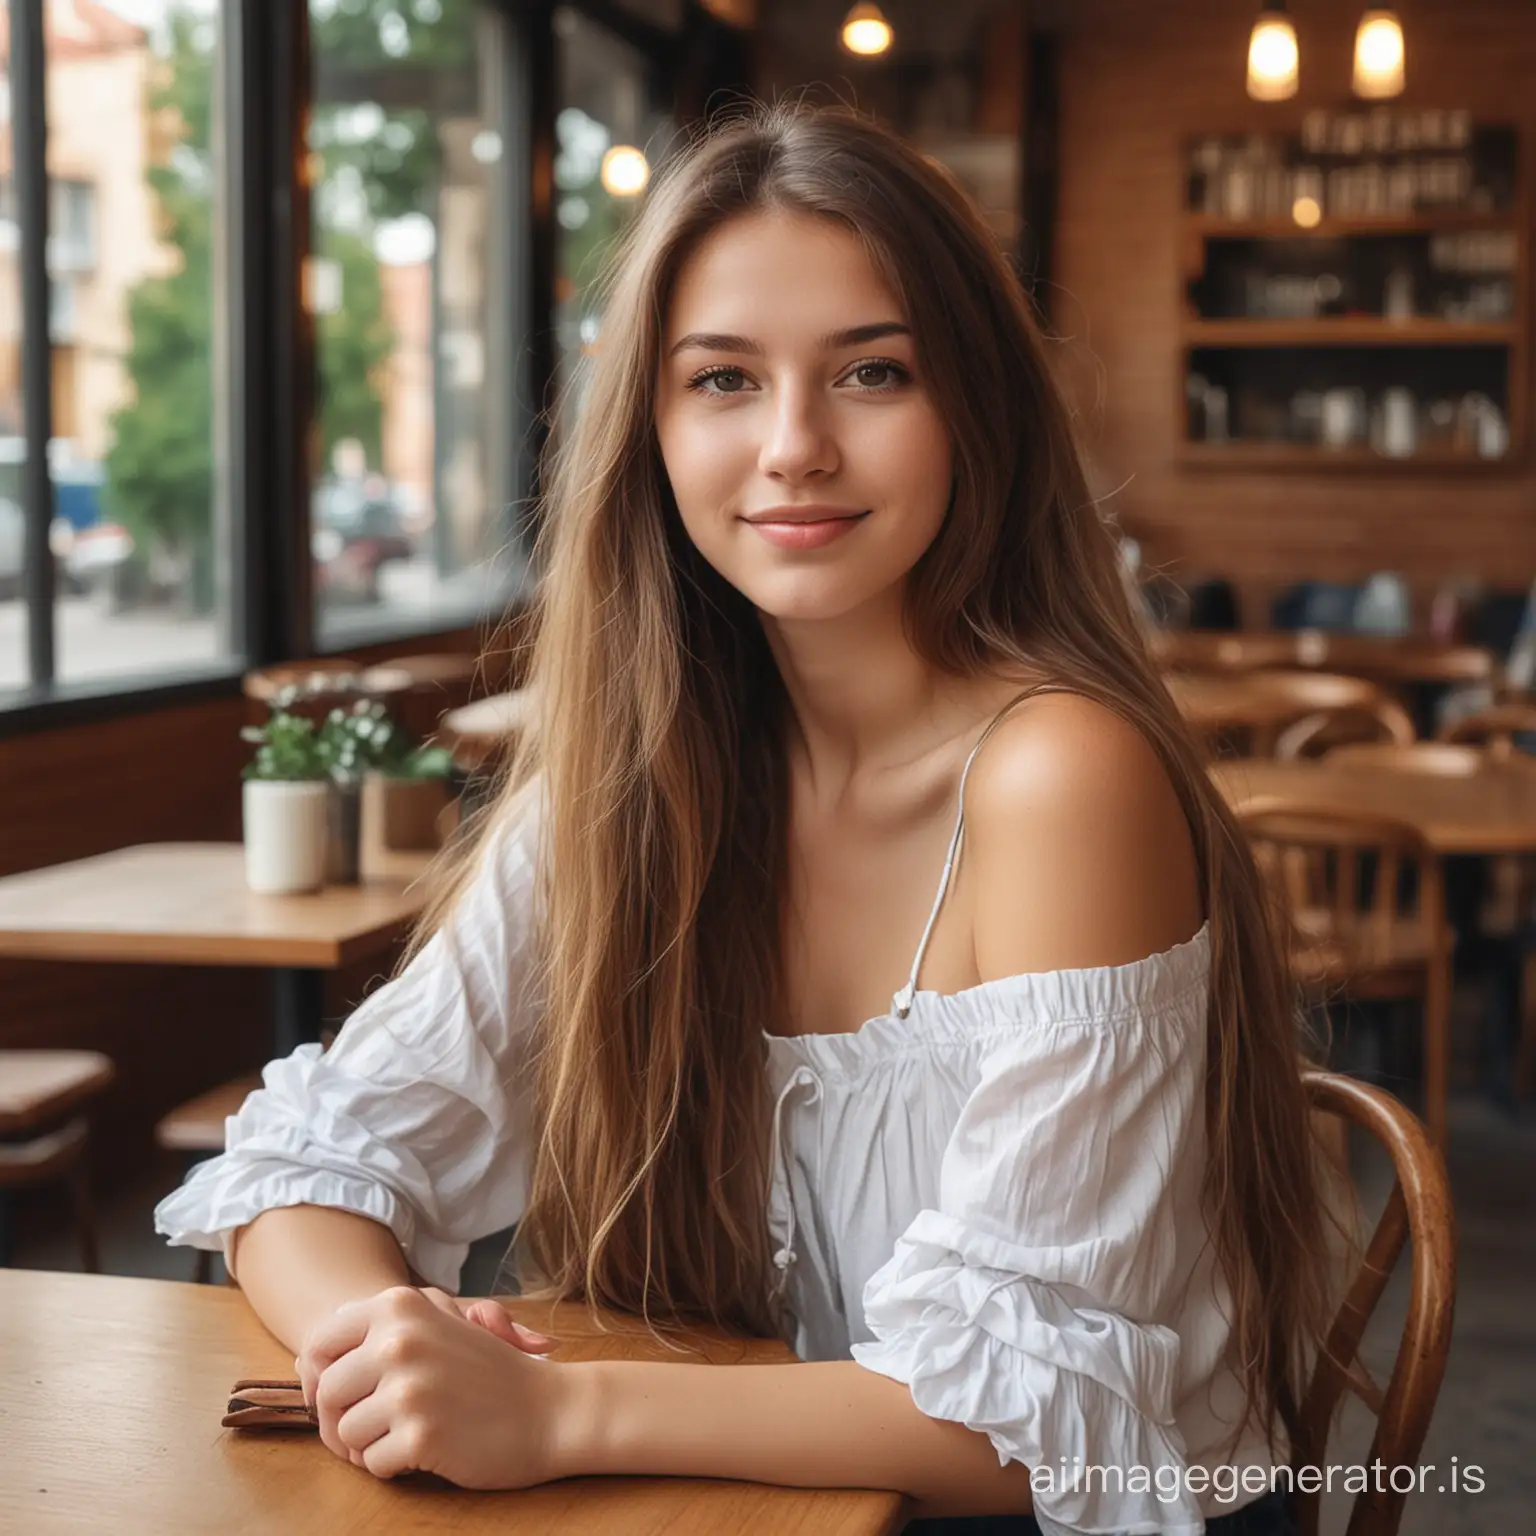 A photo of a beautiful long-haired girl sitting in a cafe